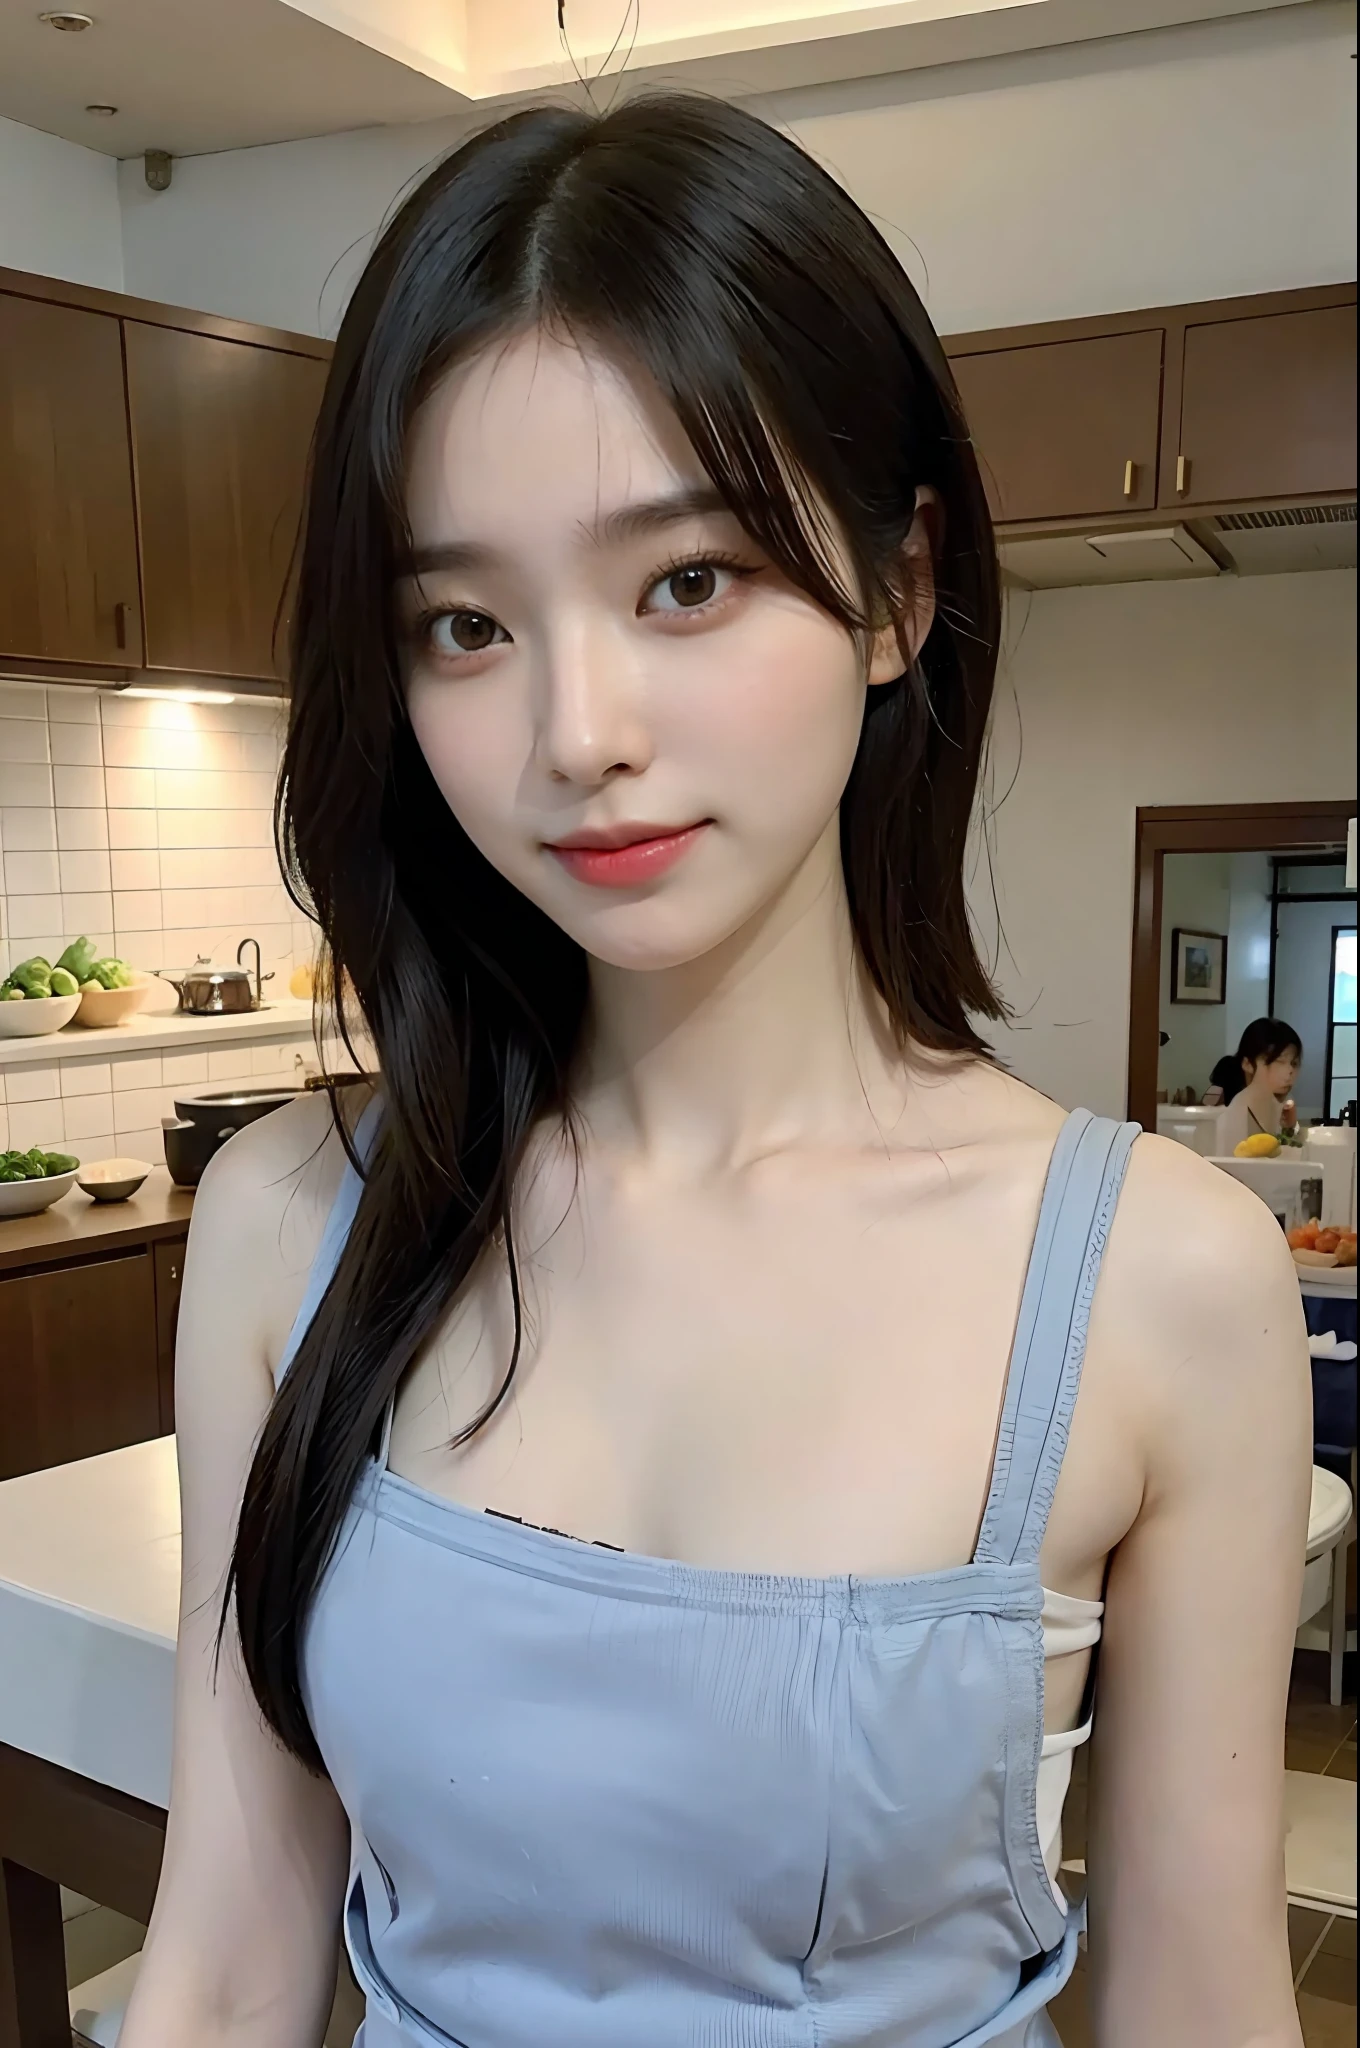 a woman is cooking、(kitchin_Apron:1.Wear 3)、Good Hand、4K、hight resolution、​masterpiece、top-quality、Cap:1.3、((Hasselblad photo))、Fine skin、sharp focus、(lighting like a movie)、Soft lighting、dynamic ungle、[:(Detailed face:1.2):0.2]、Medium chest、sweats streamed skin:1.2、(((In the kitchen))) A smile　Beautiful profile　Colossal tits　Beautiful body　Tying hair　Wide background々and a luxurious living room　Luxurious and luxurious living　Luxurious living room　Beautiful living room　Beautiful living room　A smile　an orange　lemons